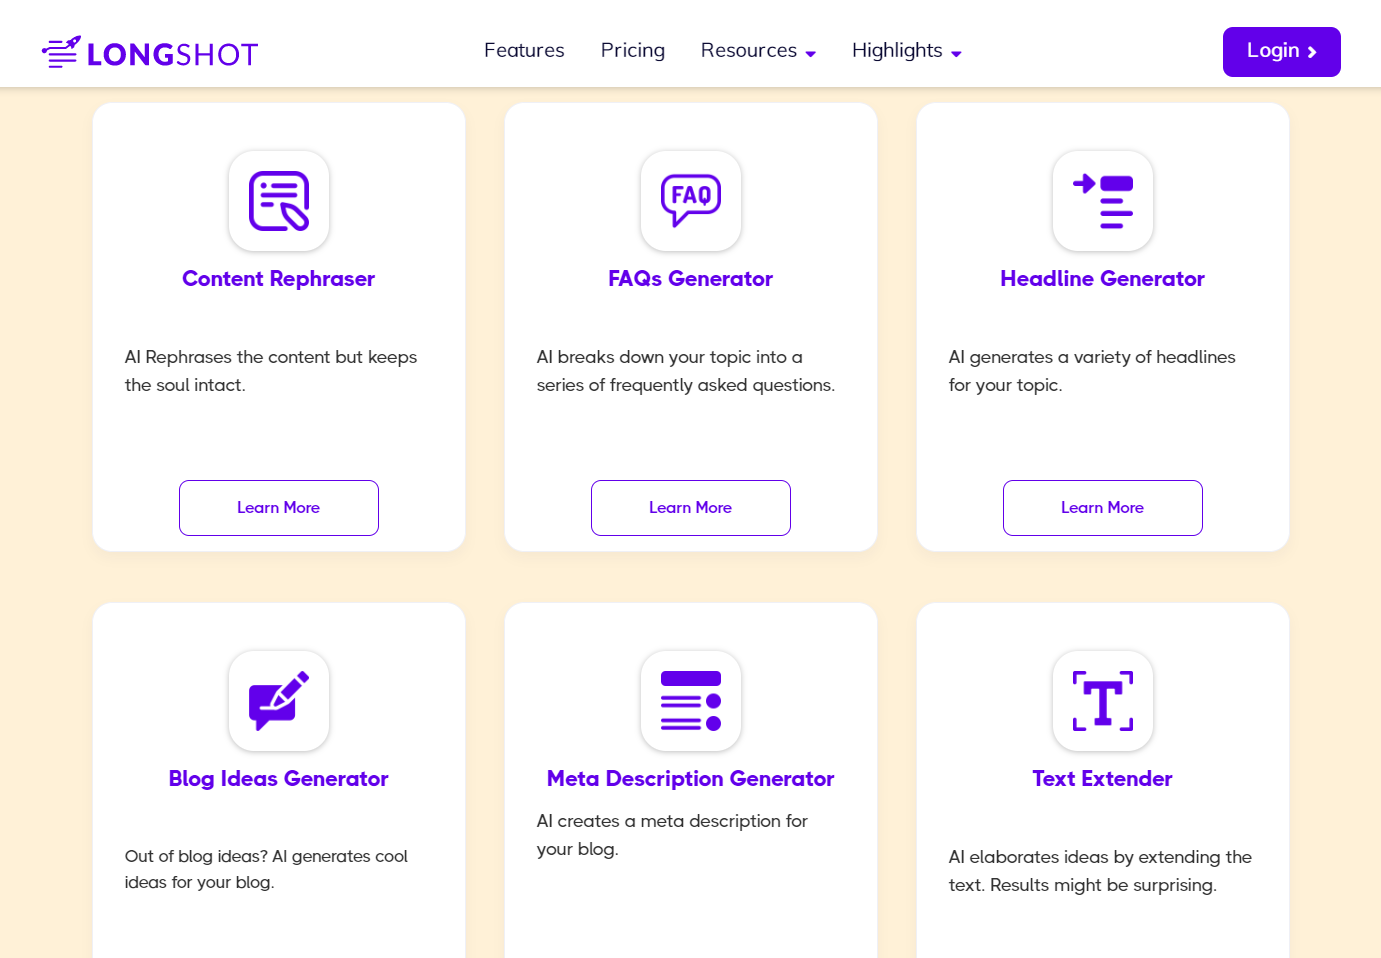 LongShot AI: The Best AI for Writing and Content? Review, Features, and Pricing